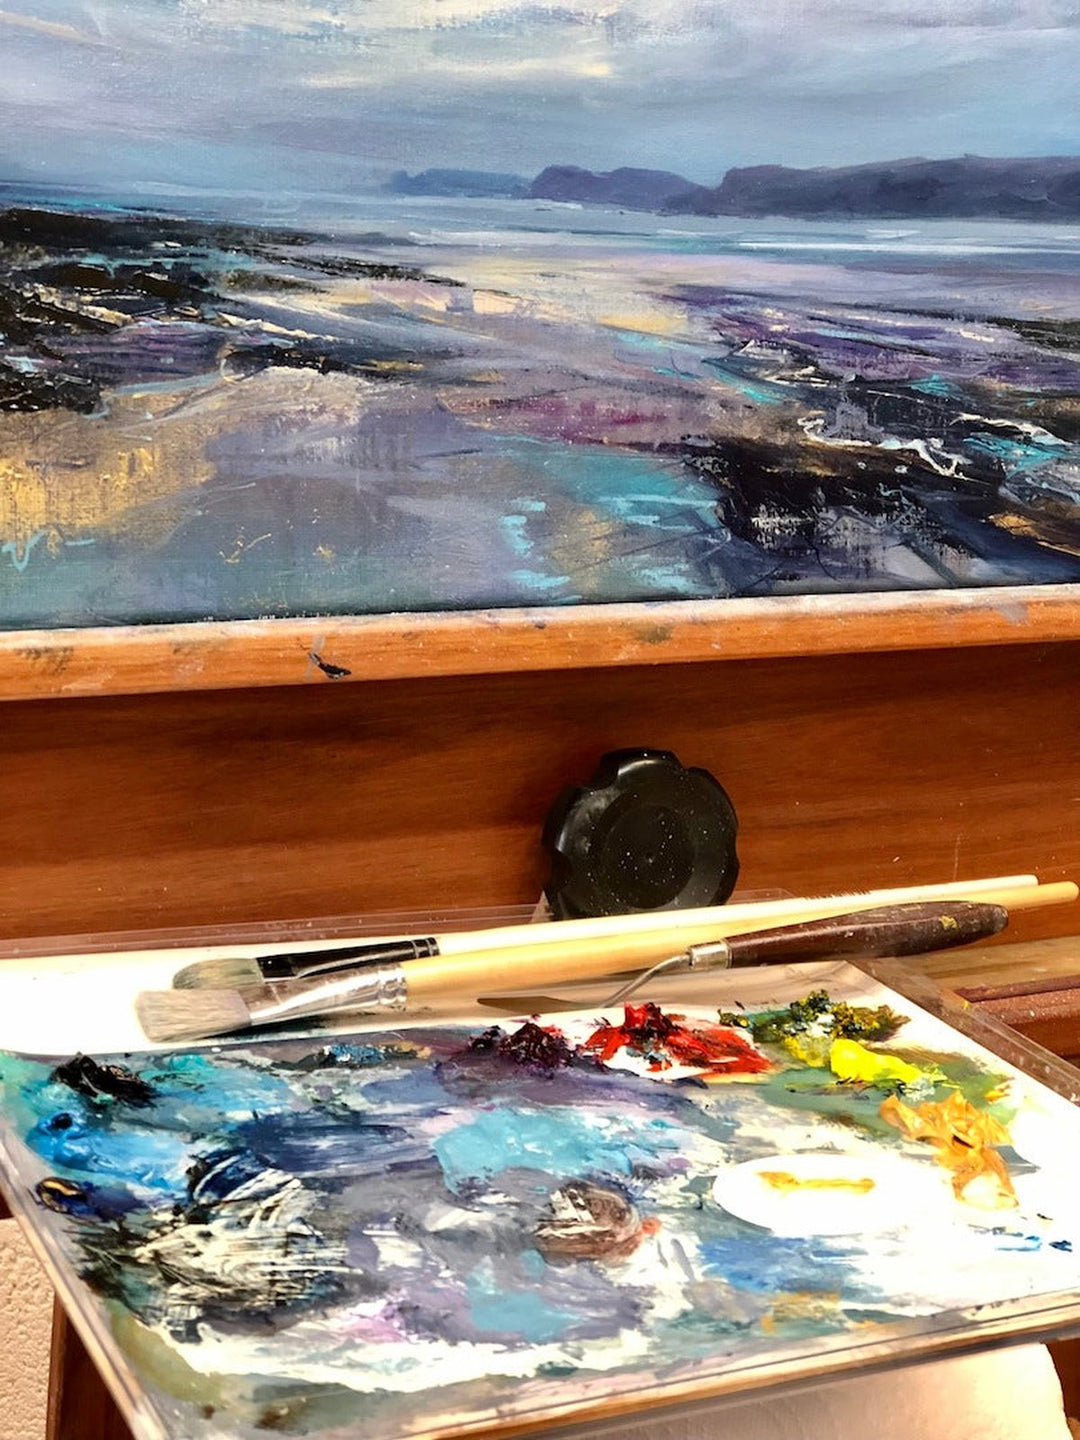 Book a workshop: Get to Grips with Oils 19th – 22th May 2022